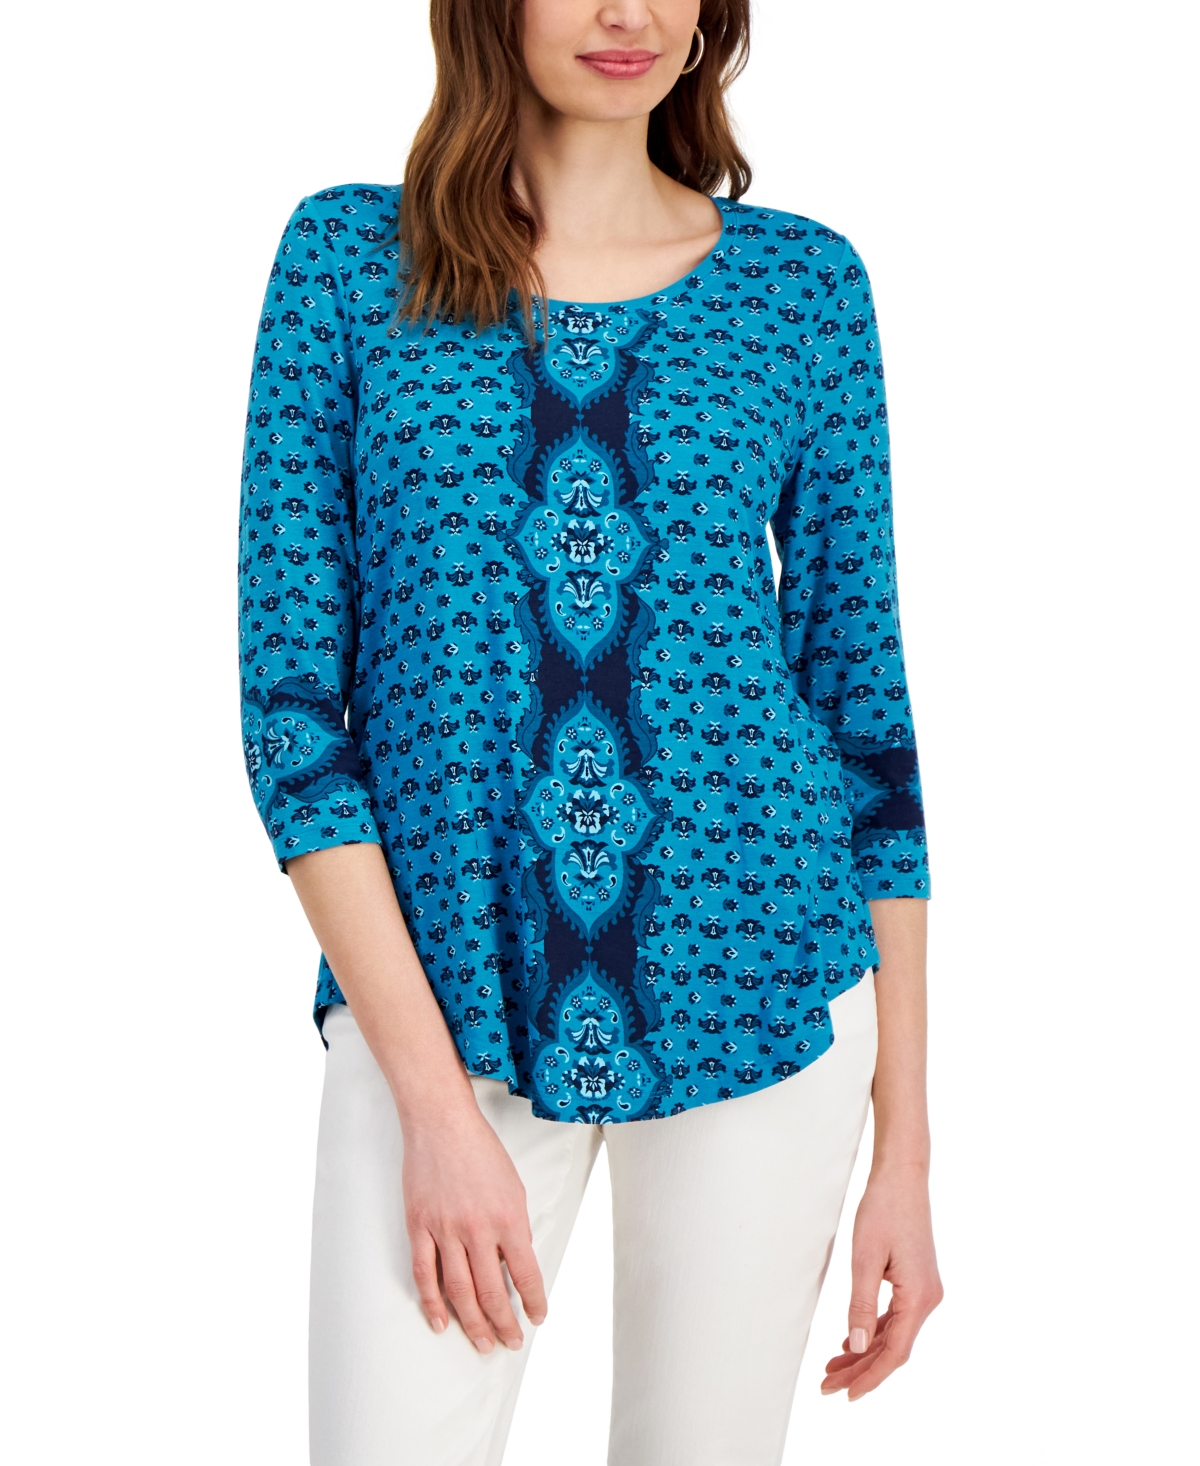 Women's Printed 3/4-Sleeve Top, Created for Macy's - Seafrost Combo